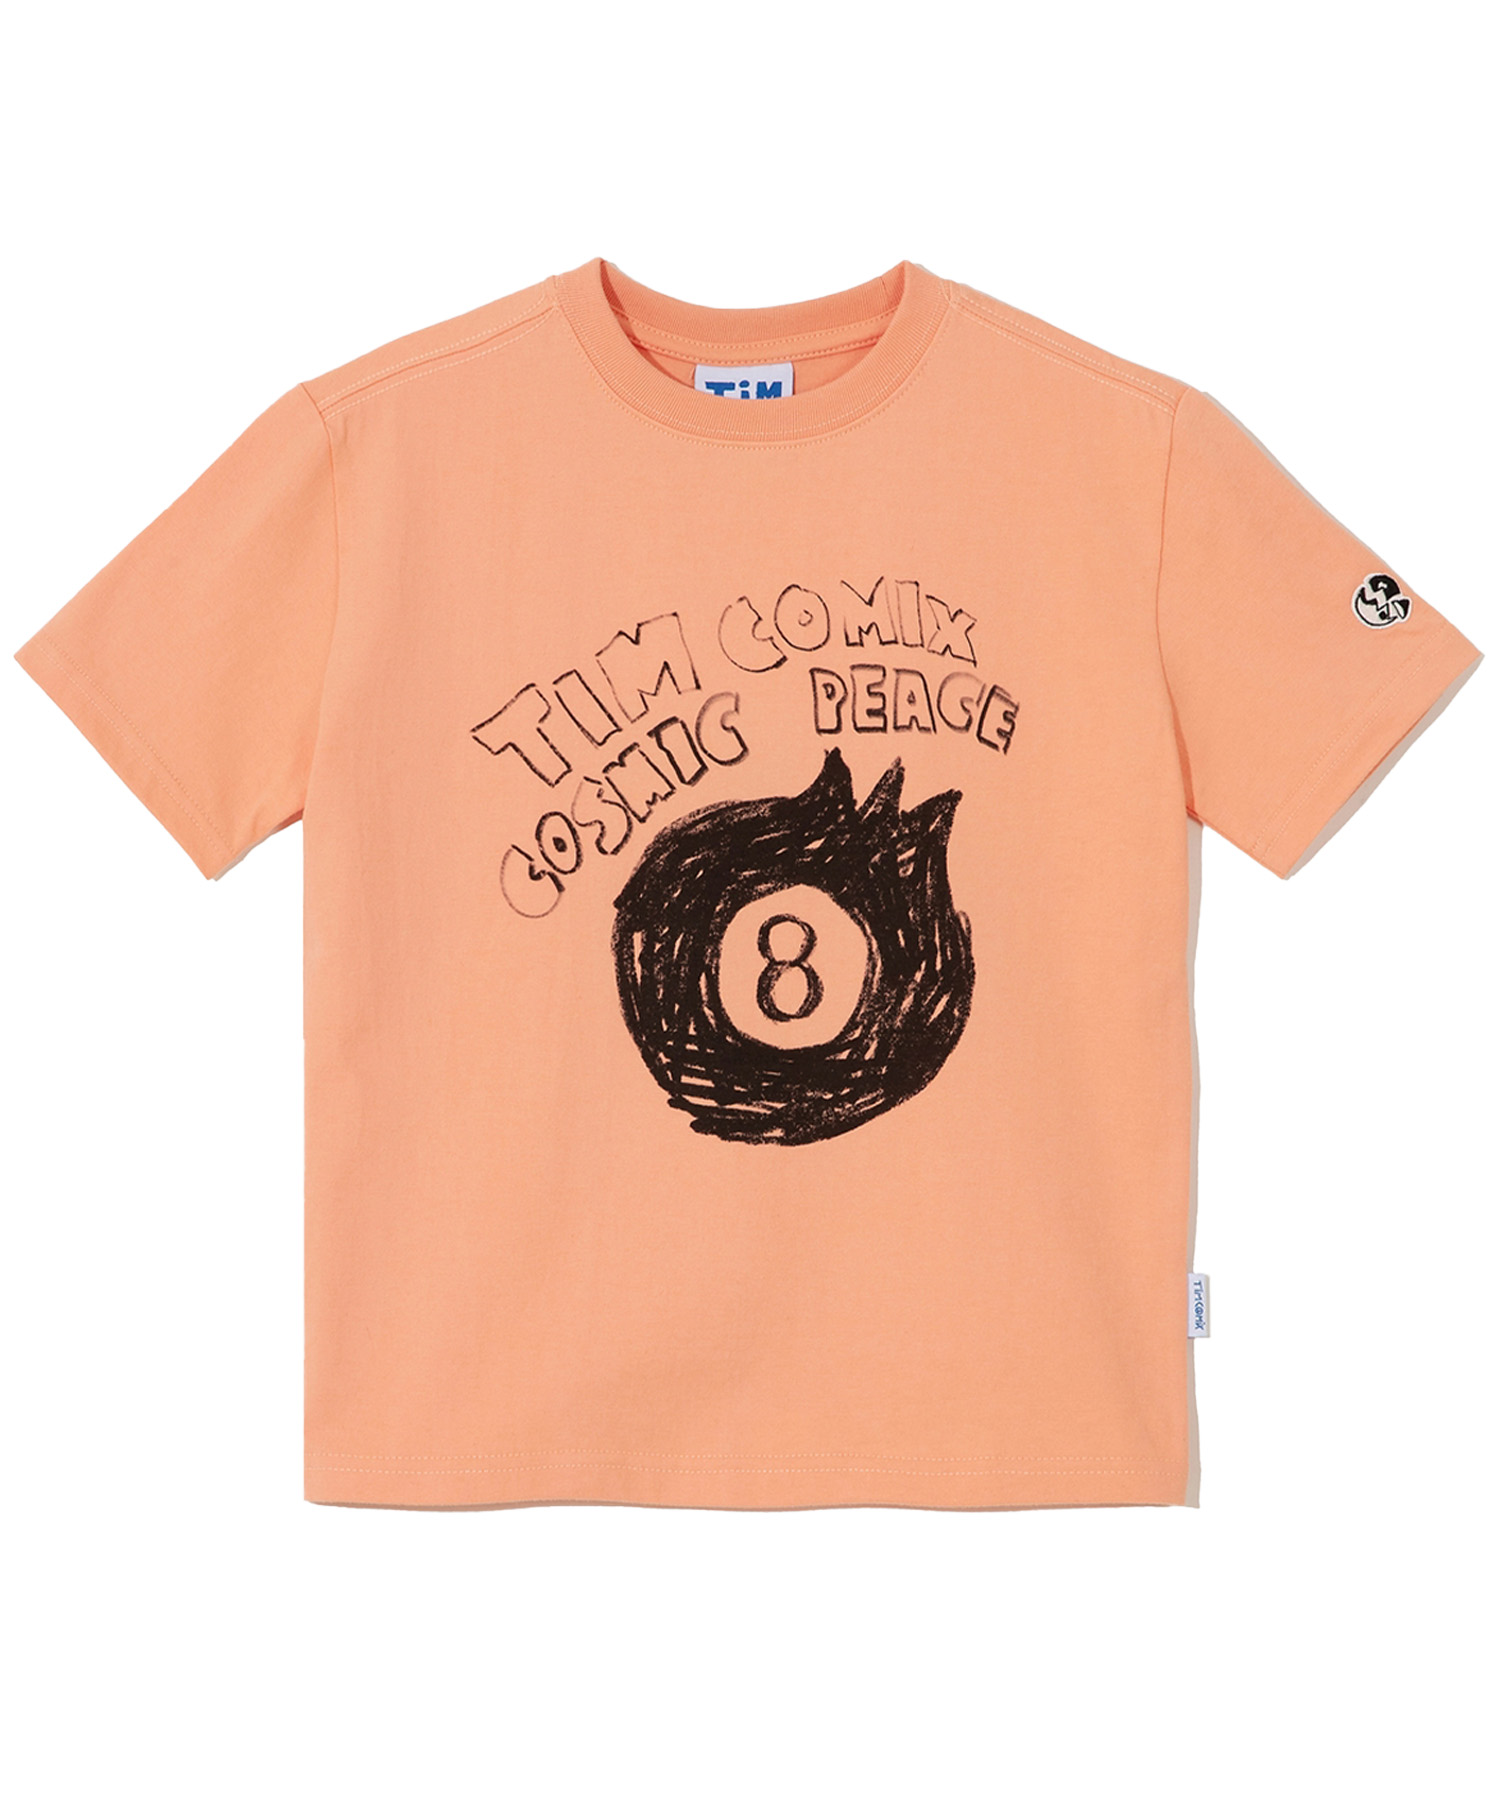 8 BALL DOODLE KIDS SS CORAL